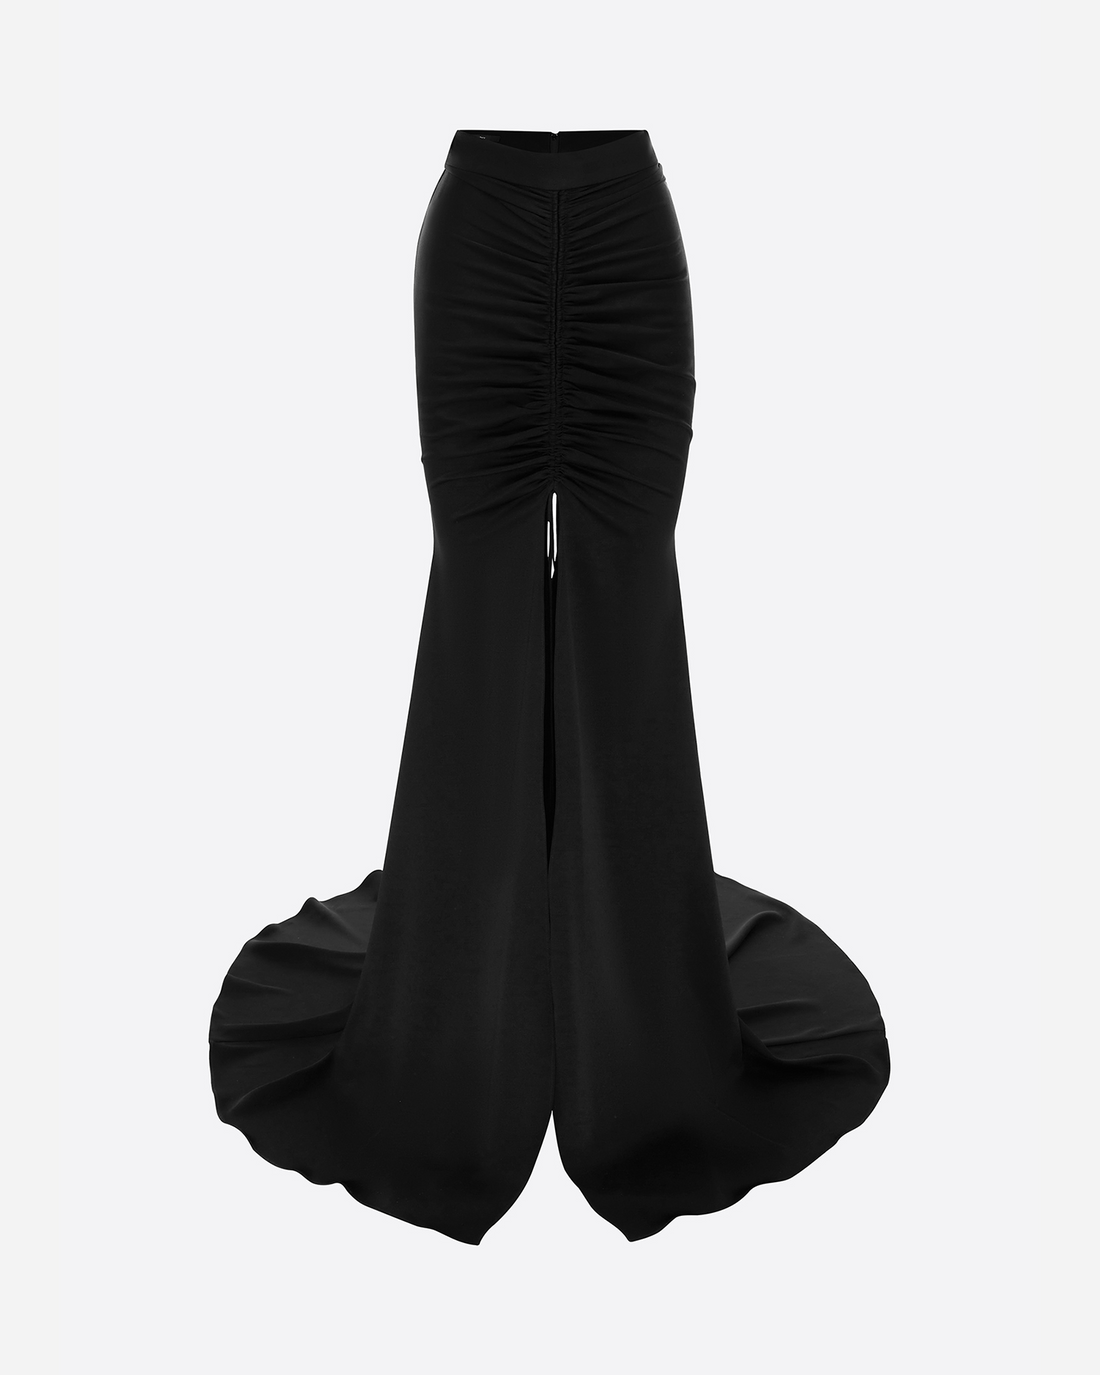 Ruched Long Skirt in Satin Crepe